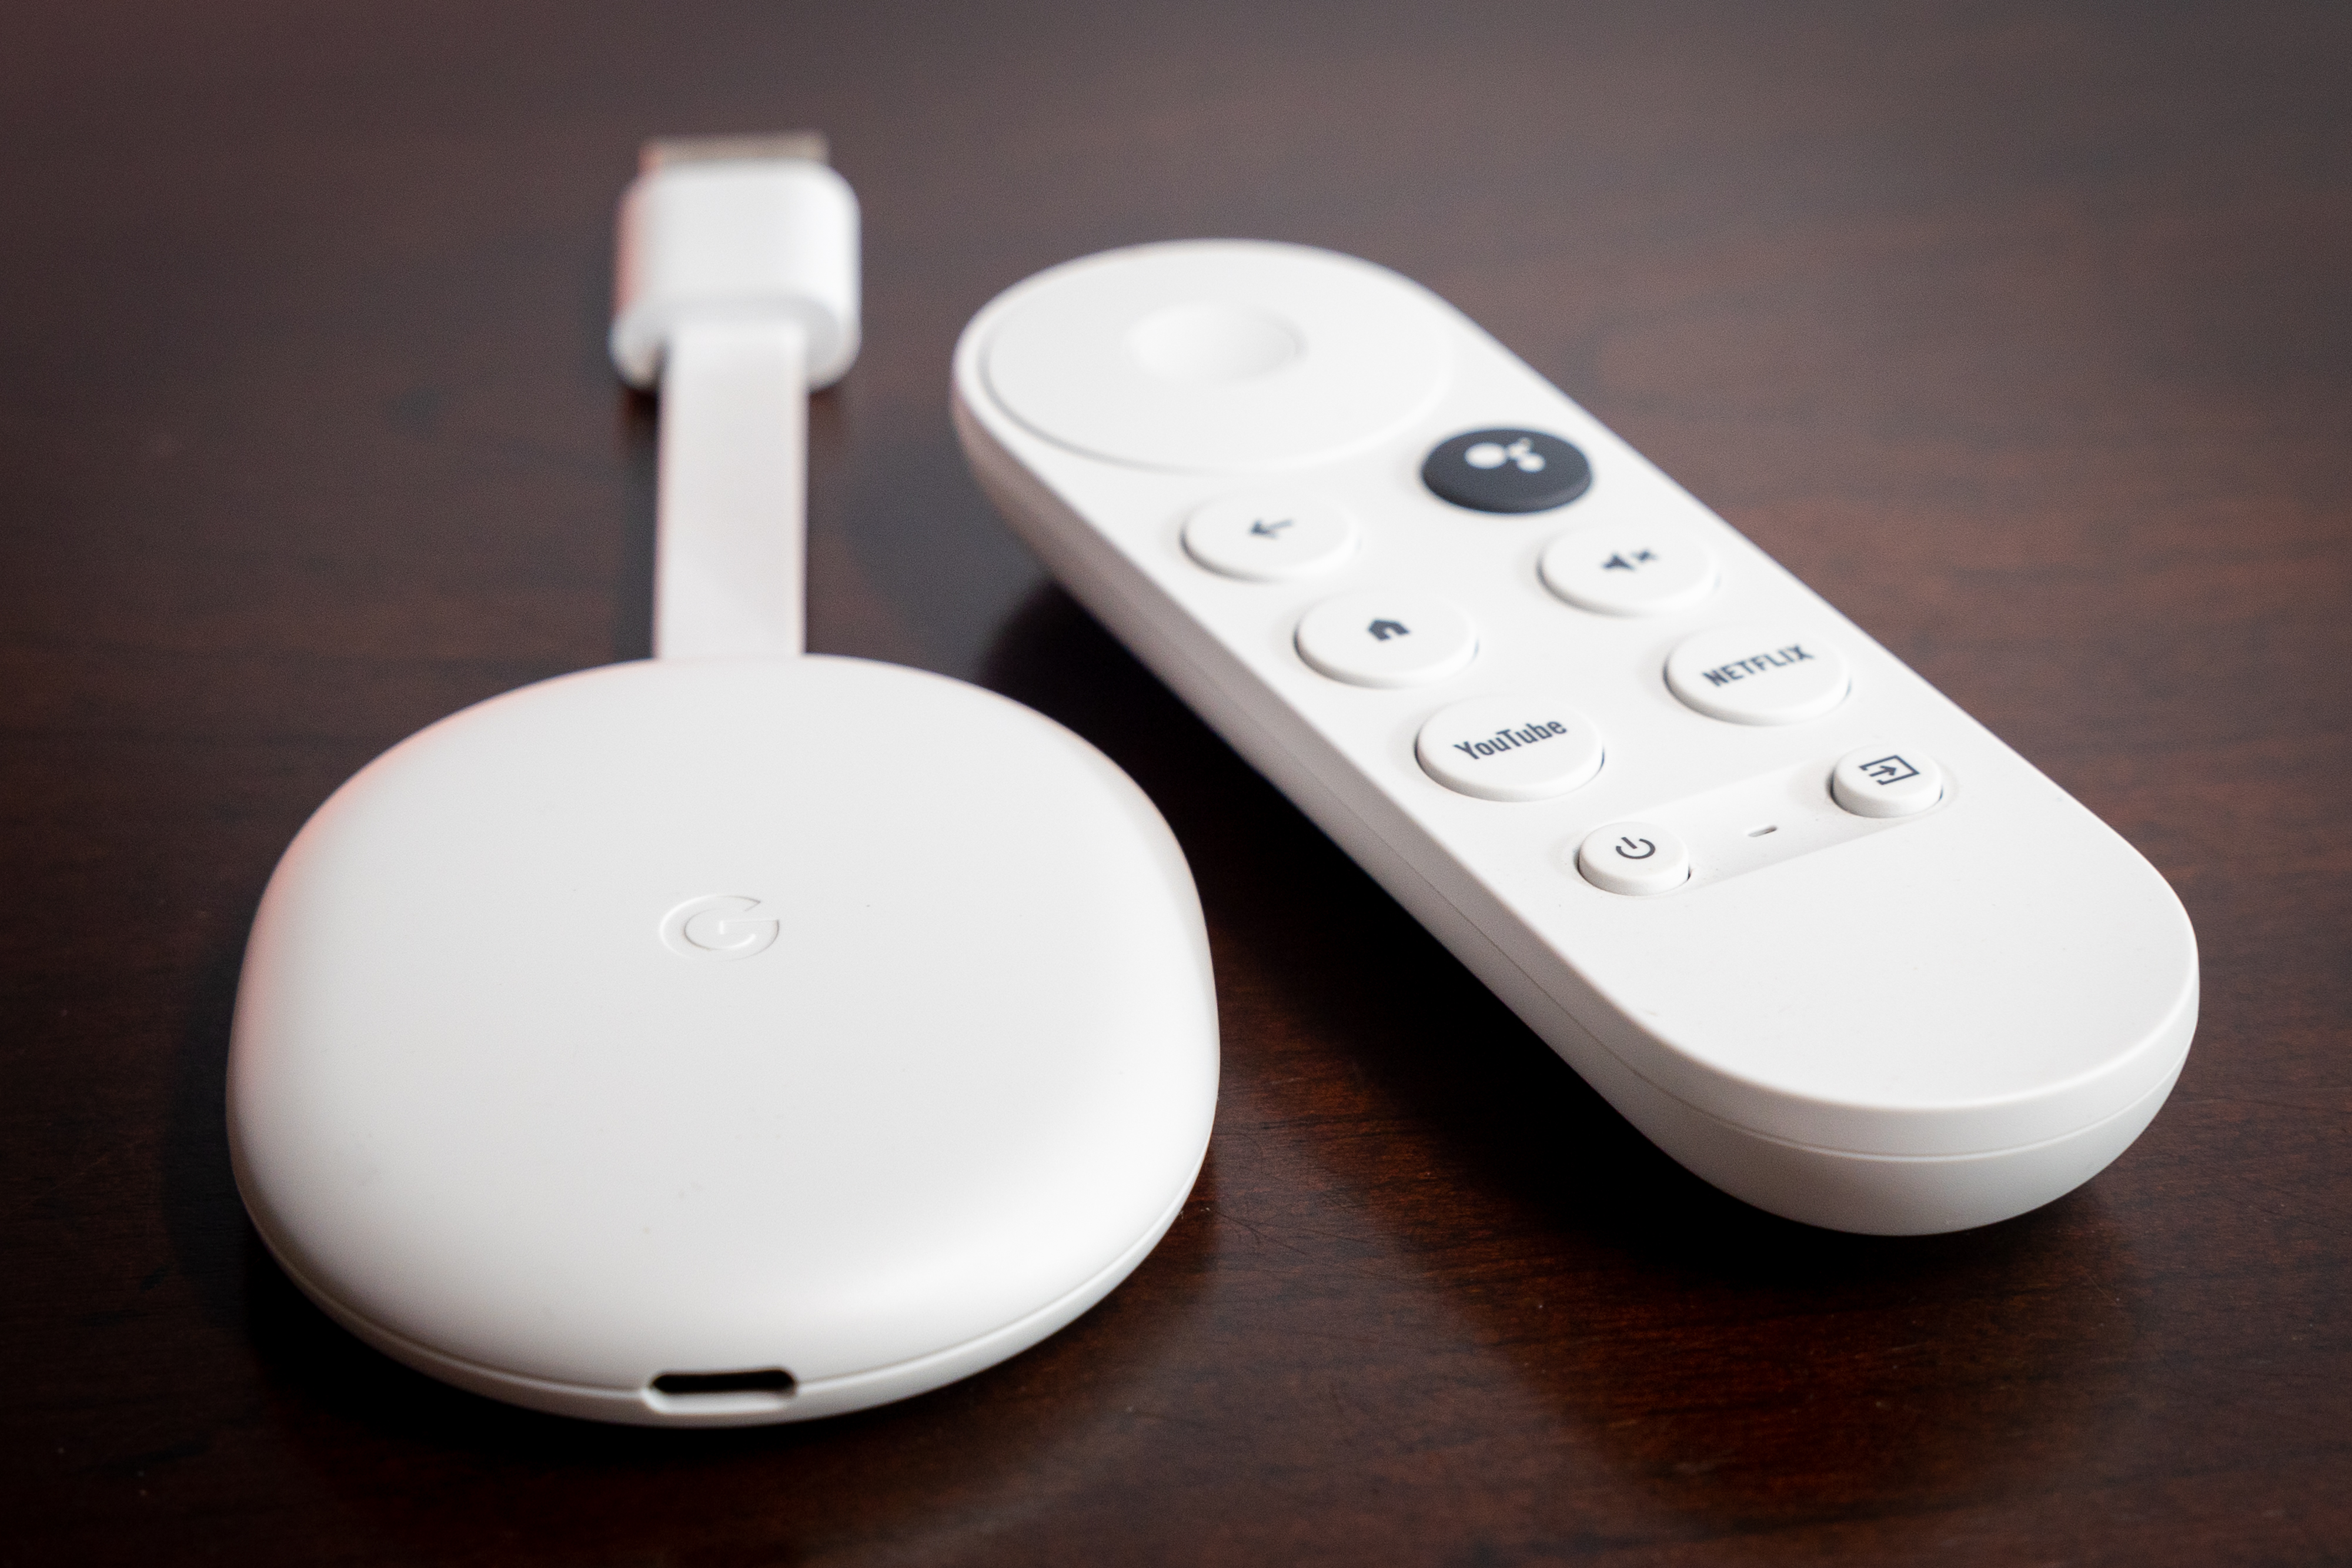 Google TV looks to be the best part of the new 4K Chromecast